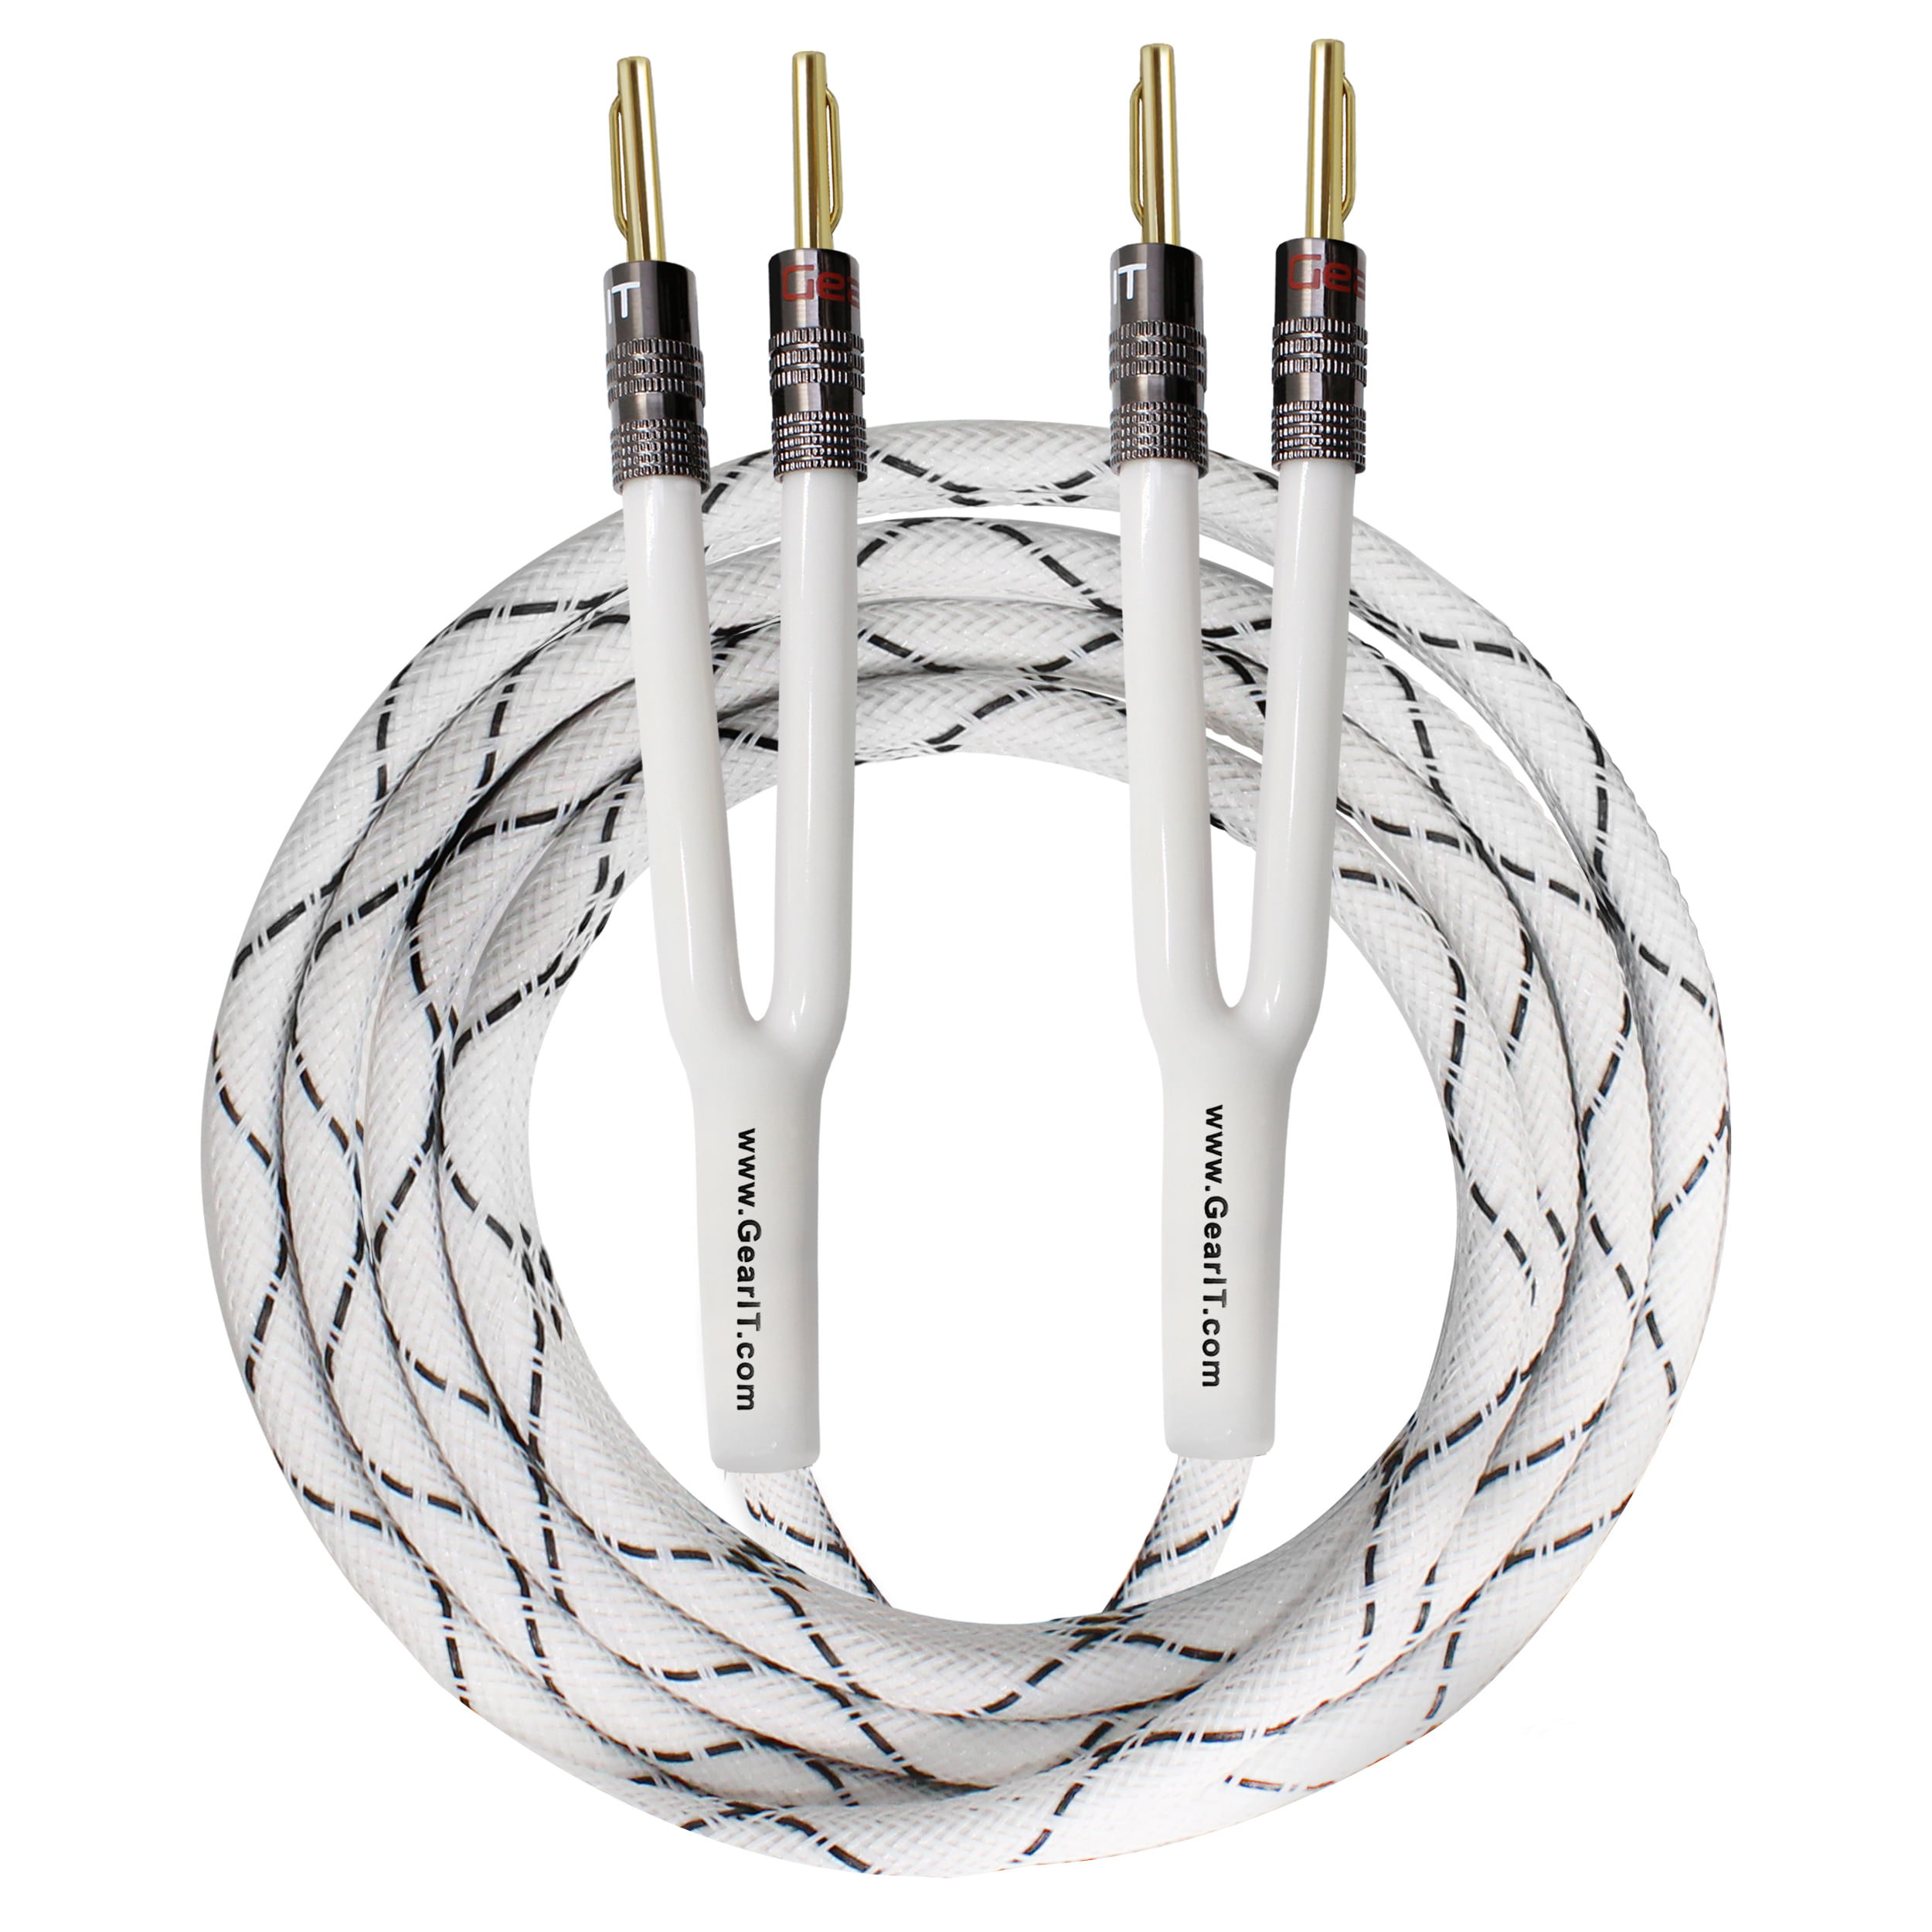 Elite Pure Copper Braided Bi-Wire Speaker Cable 1 Pair 2 to 4 Gold-Plated Banana Plugs 30 Ft MADE IN USA.